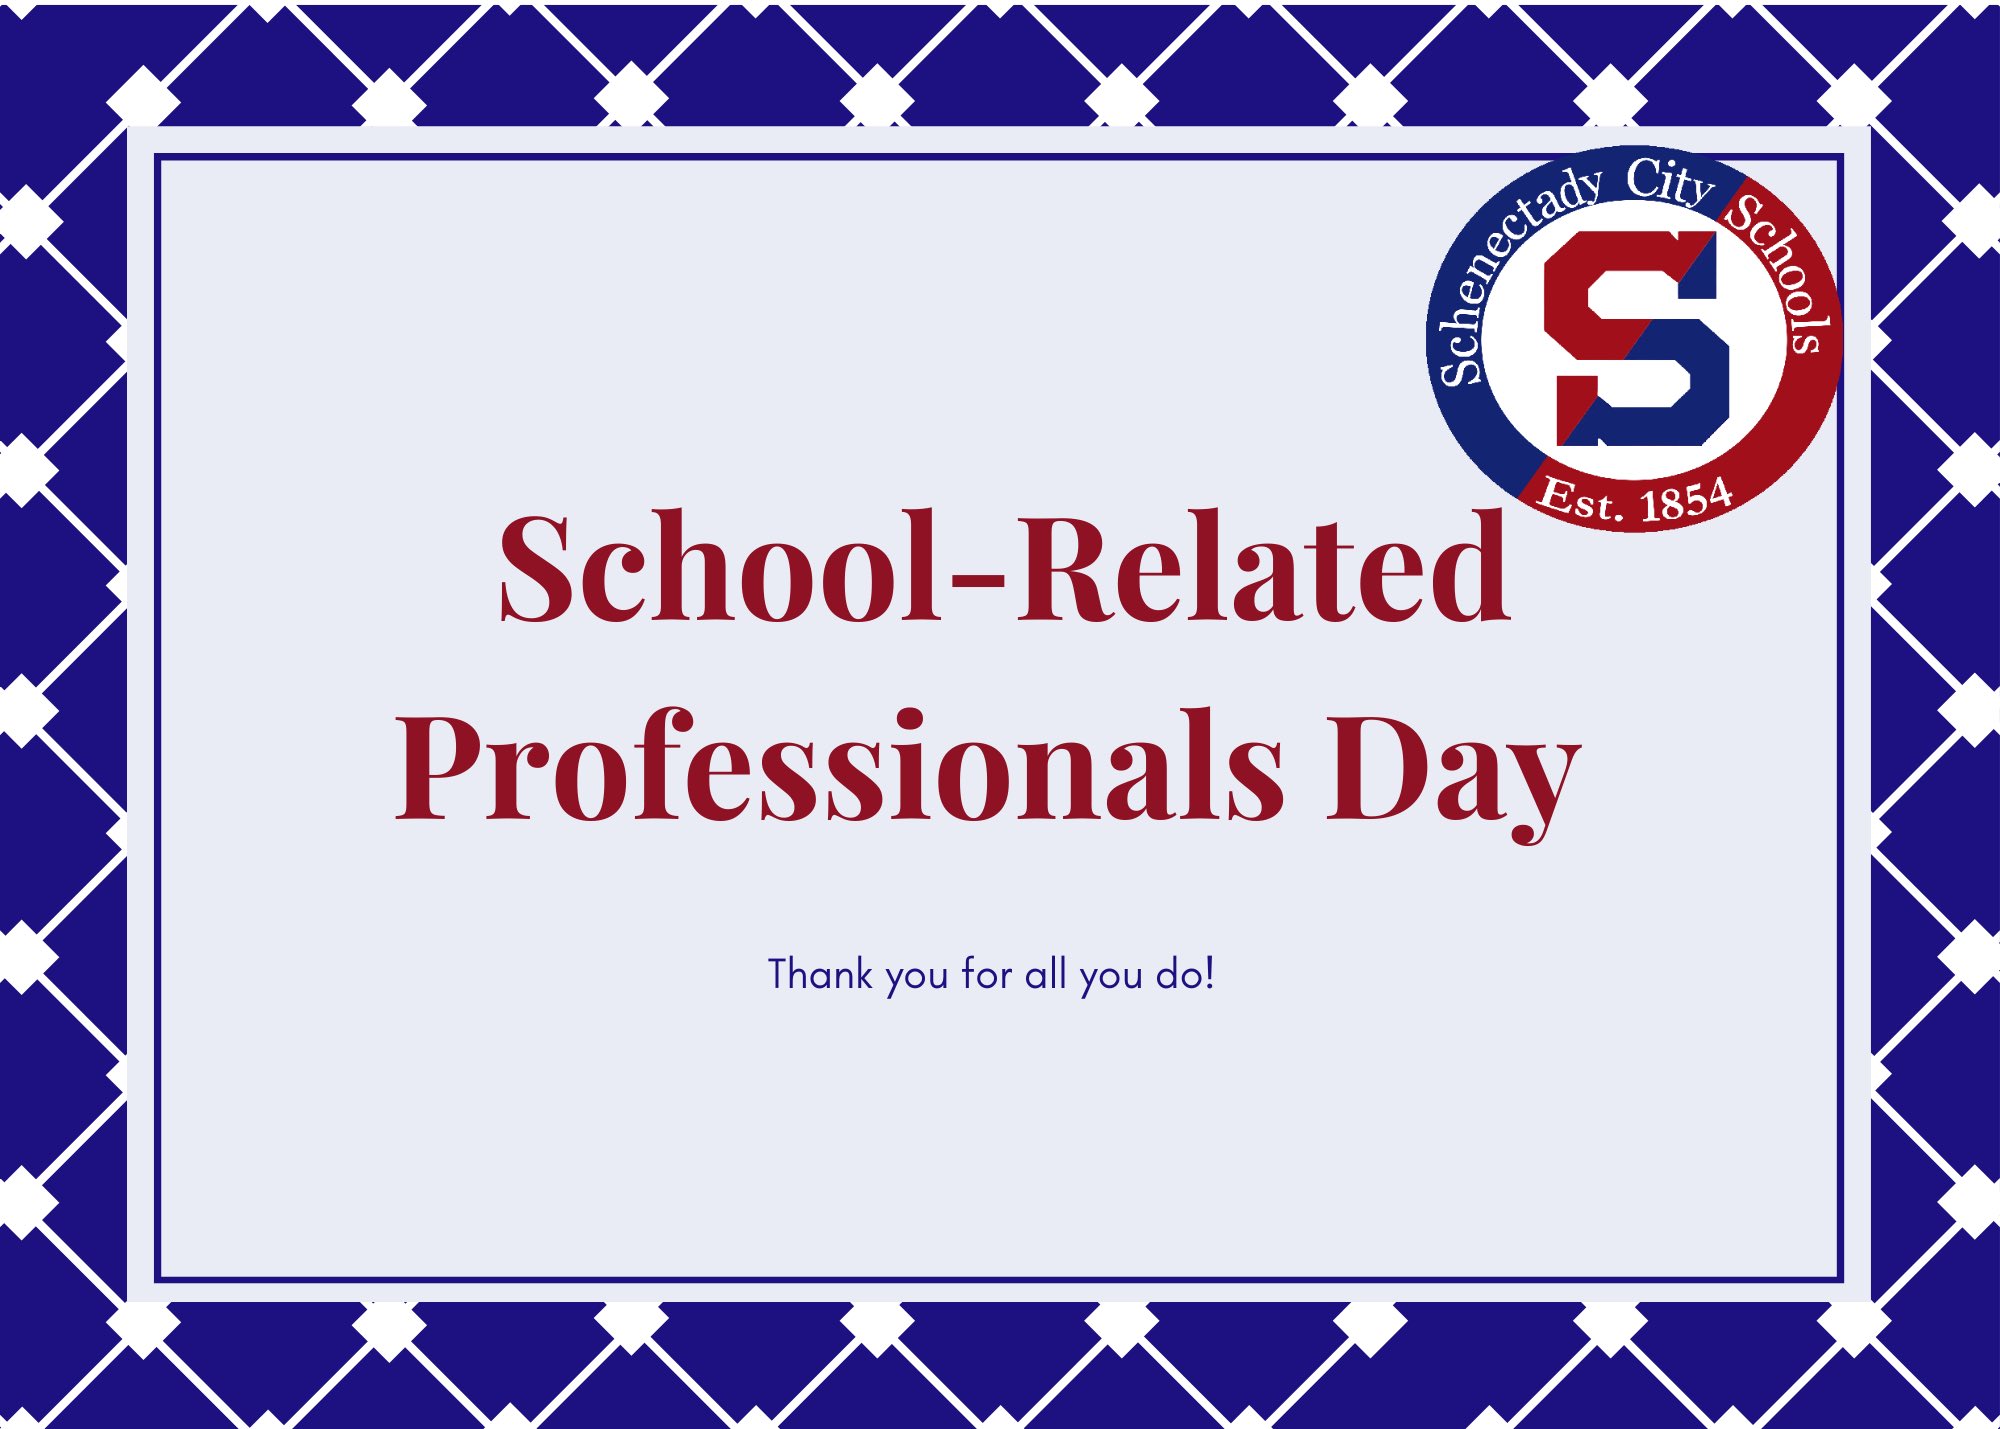 Happy School-Related Professionals Day